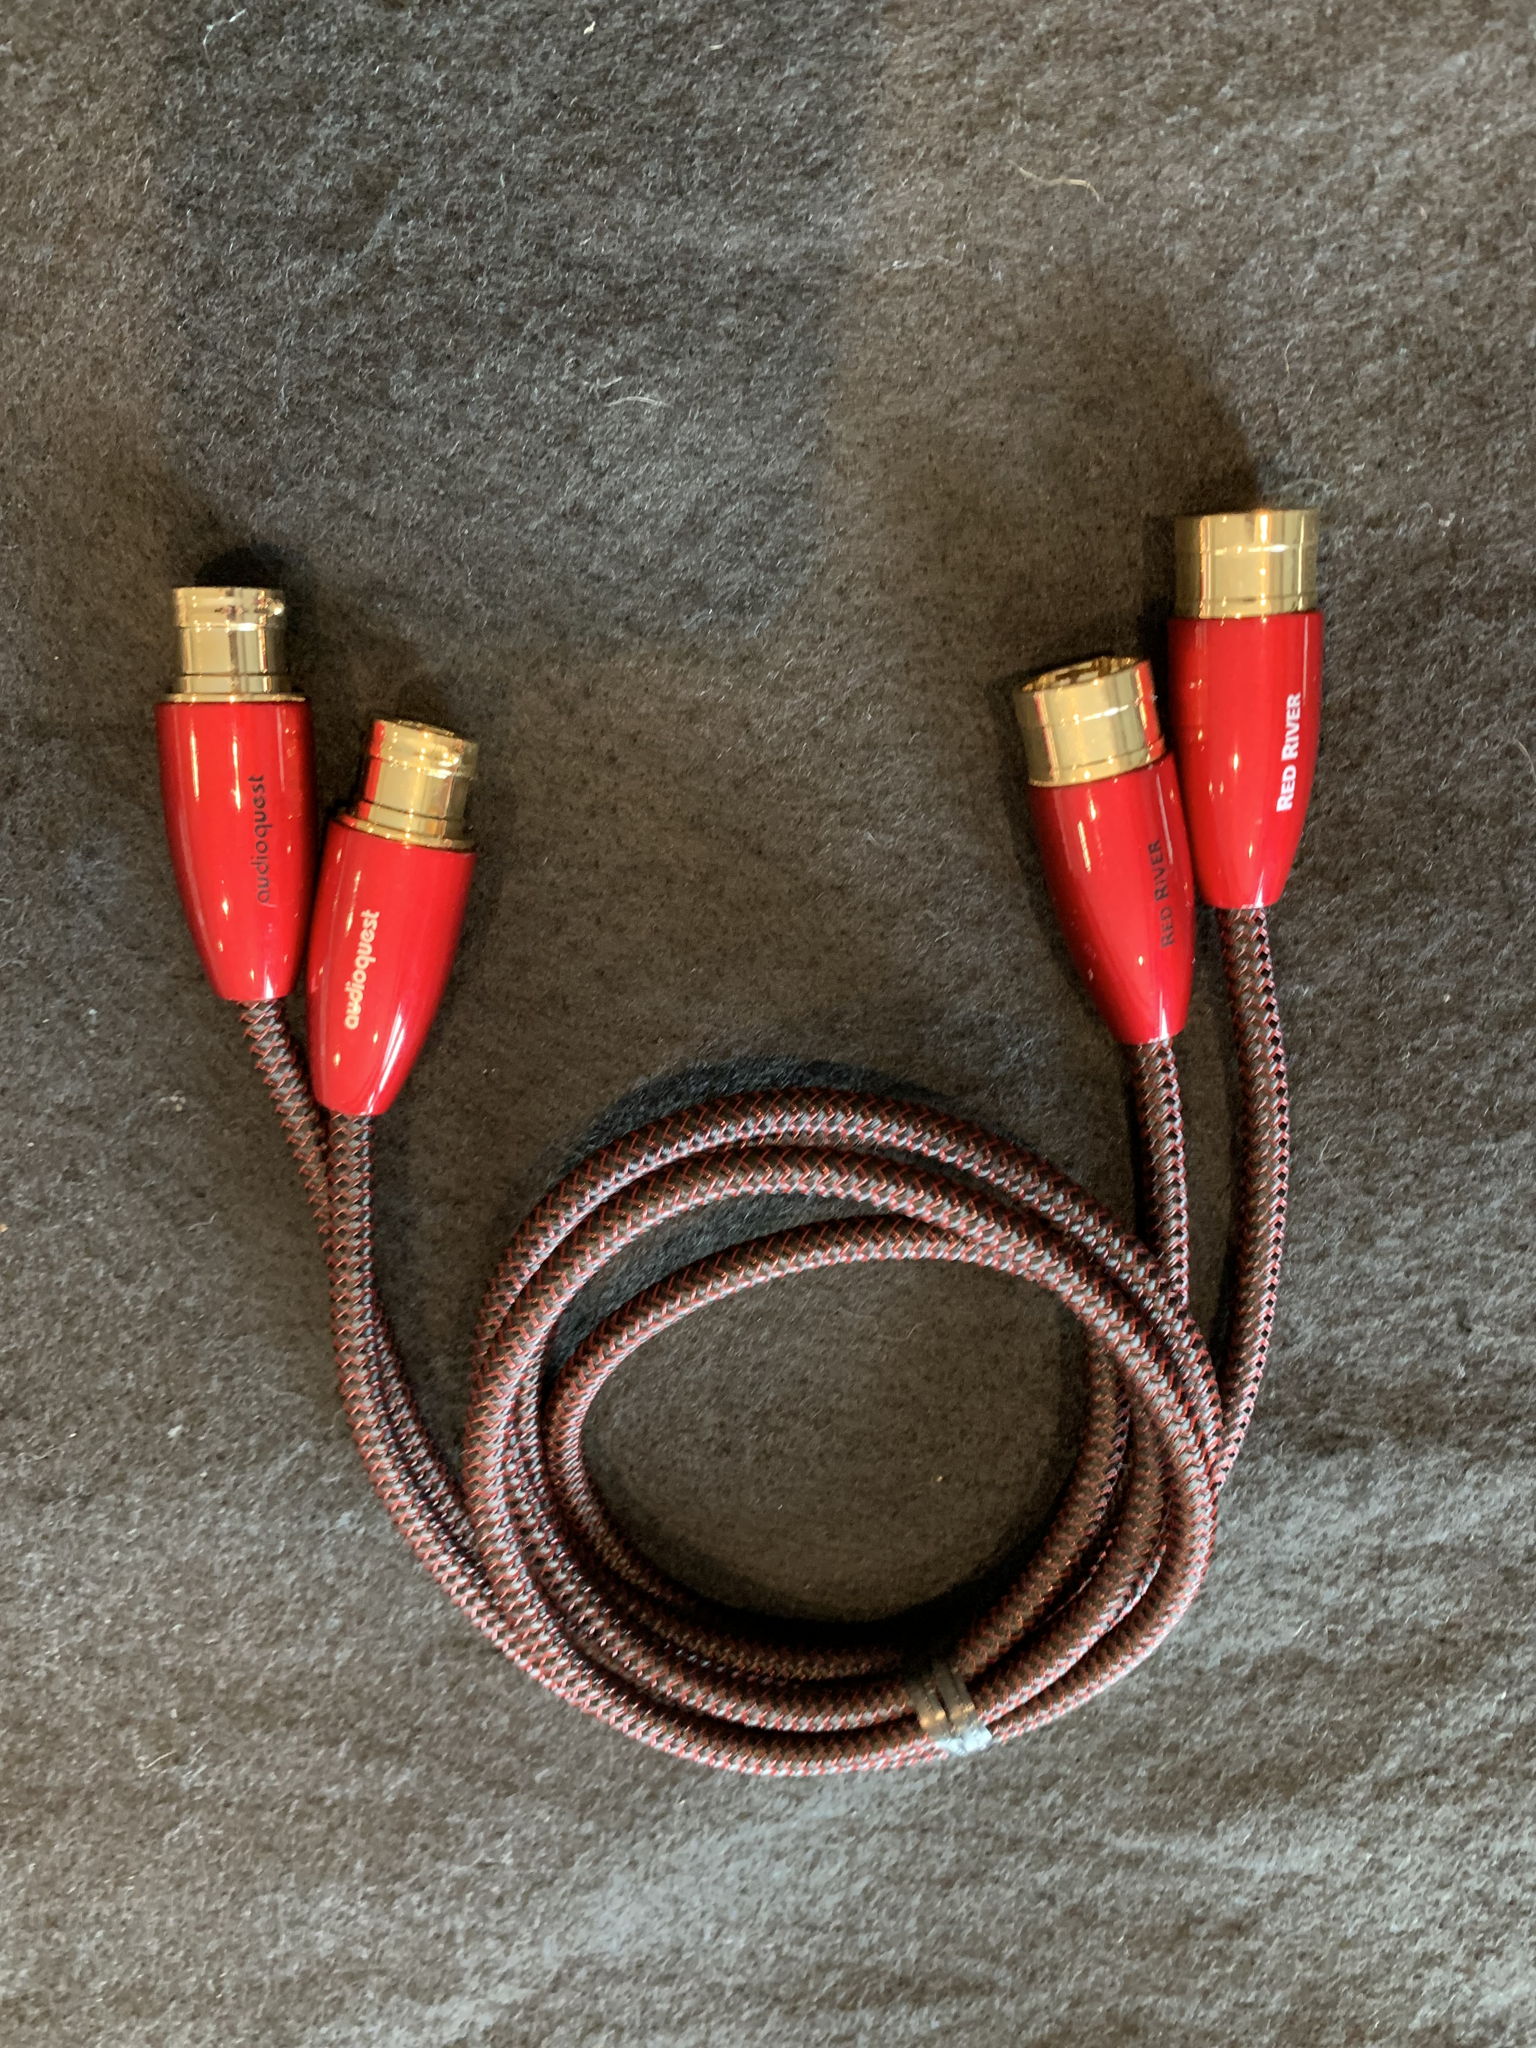 AudioQuest Red River 1m XLR to XLR Interconnects Looks ... 2